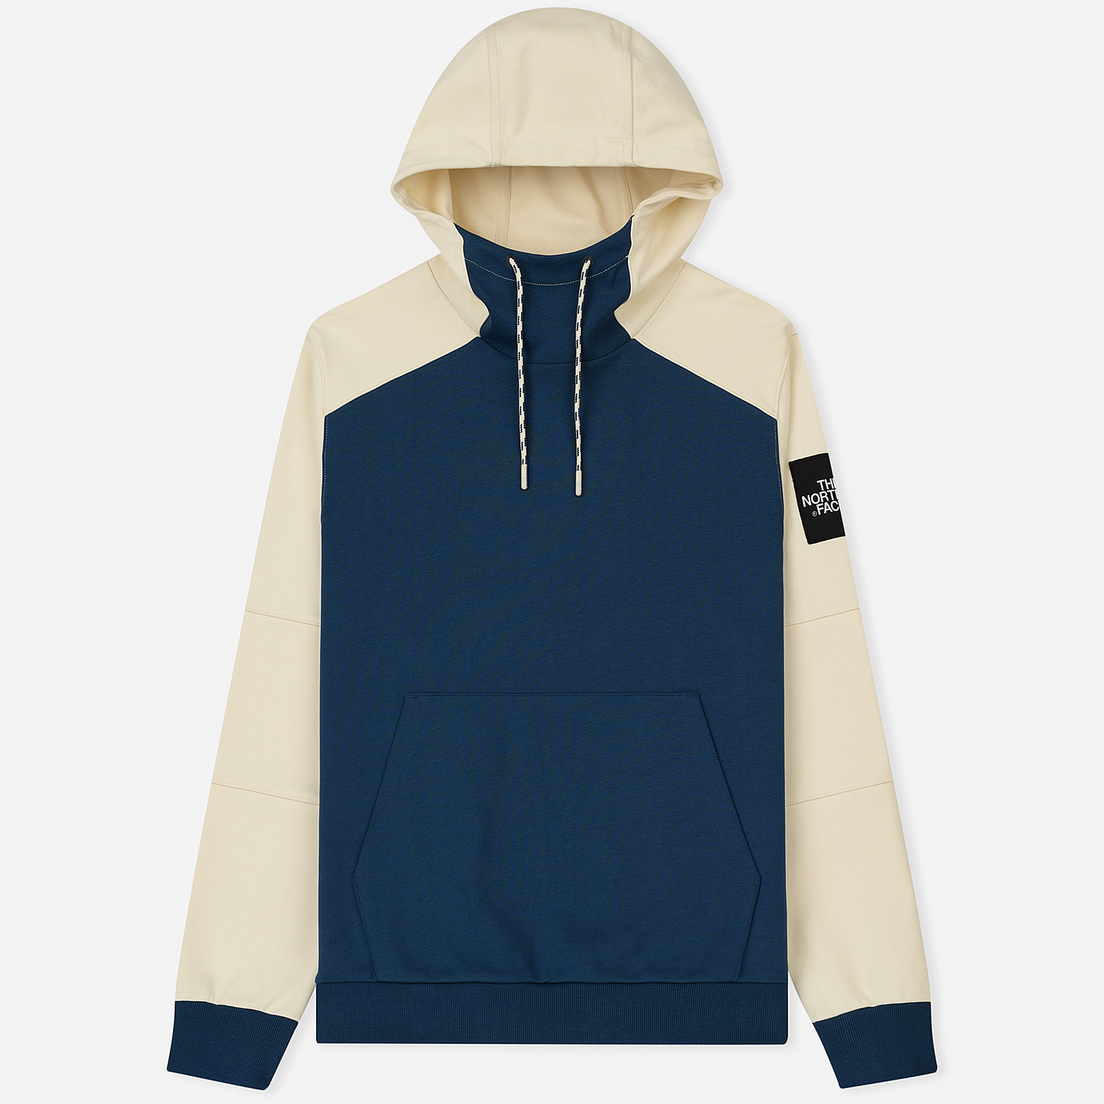 the north face hoodie blue